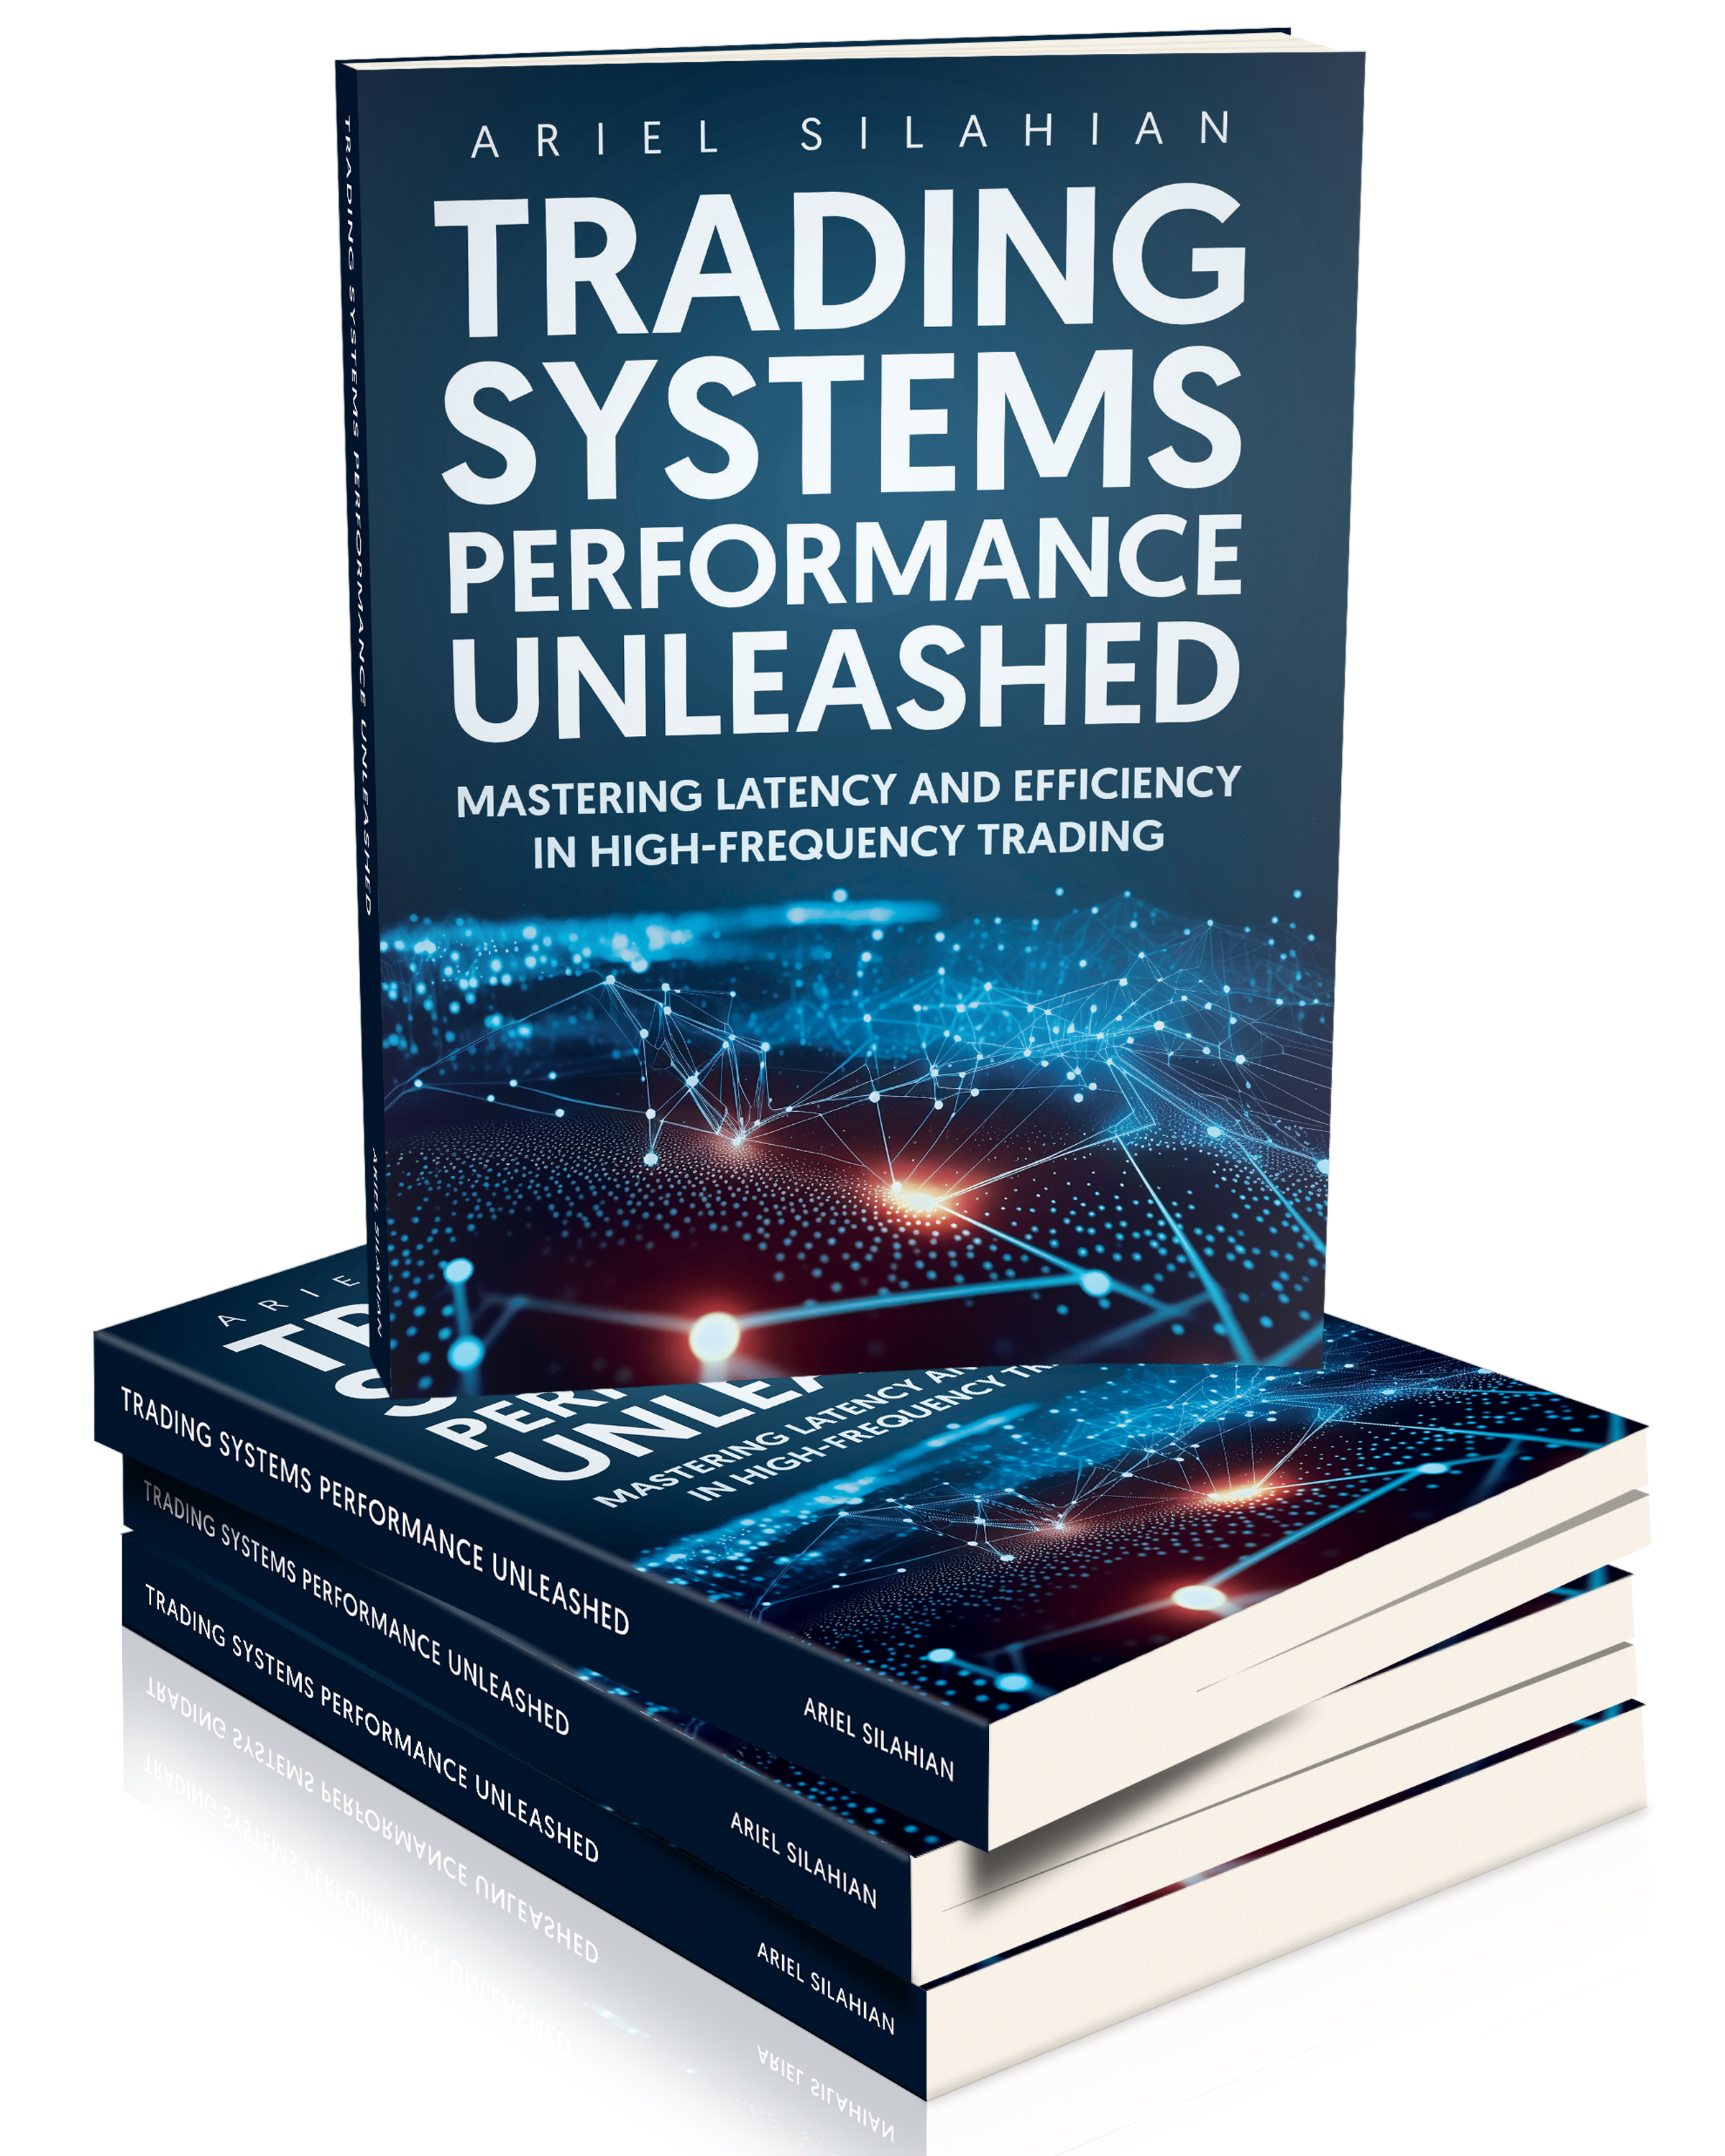 Master latency & efficiency in high-frequency trading with this comprehensive ebook. Gain expert insights, practical strategies, and ongoing performance tracking tailored for finance professionals.